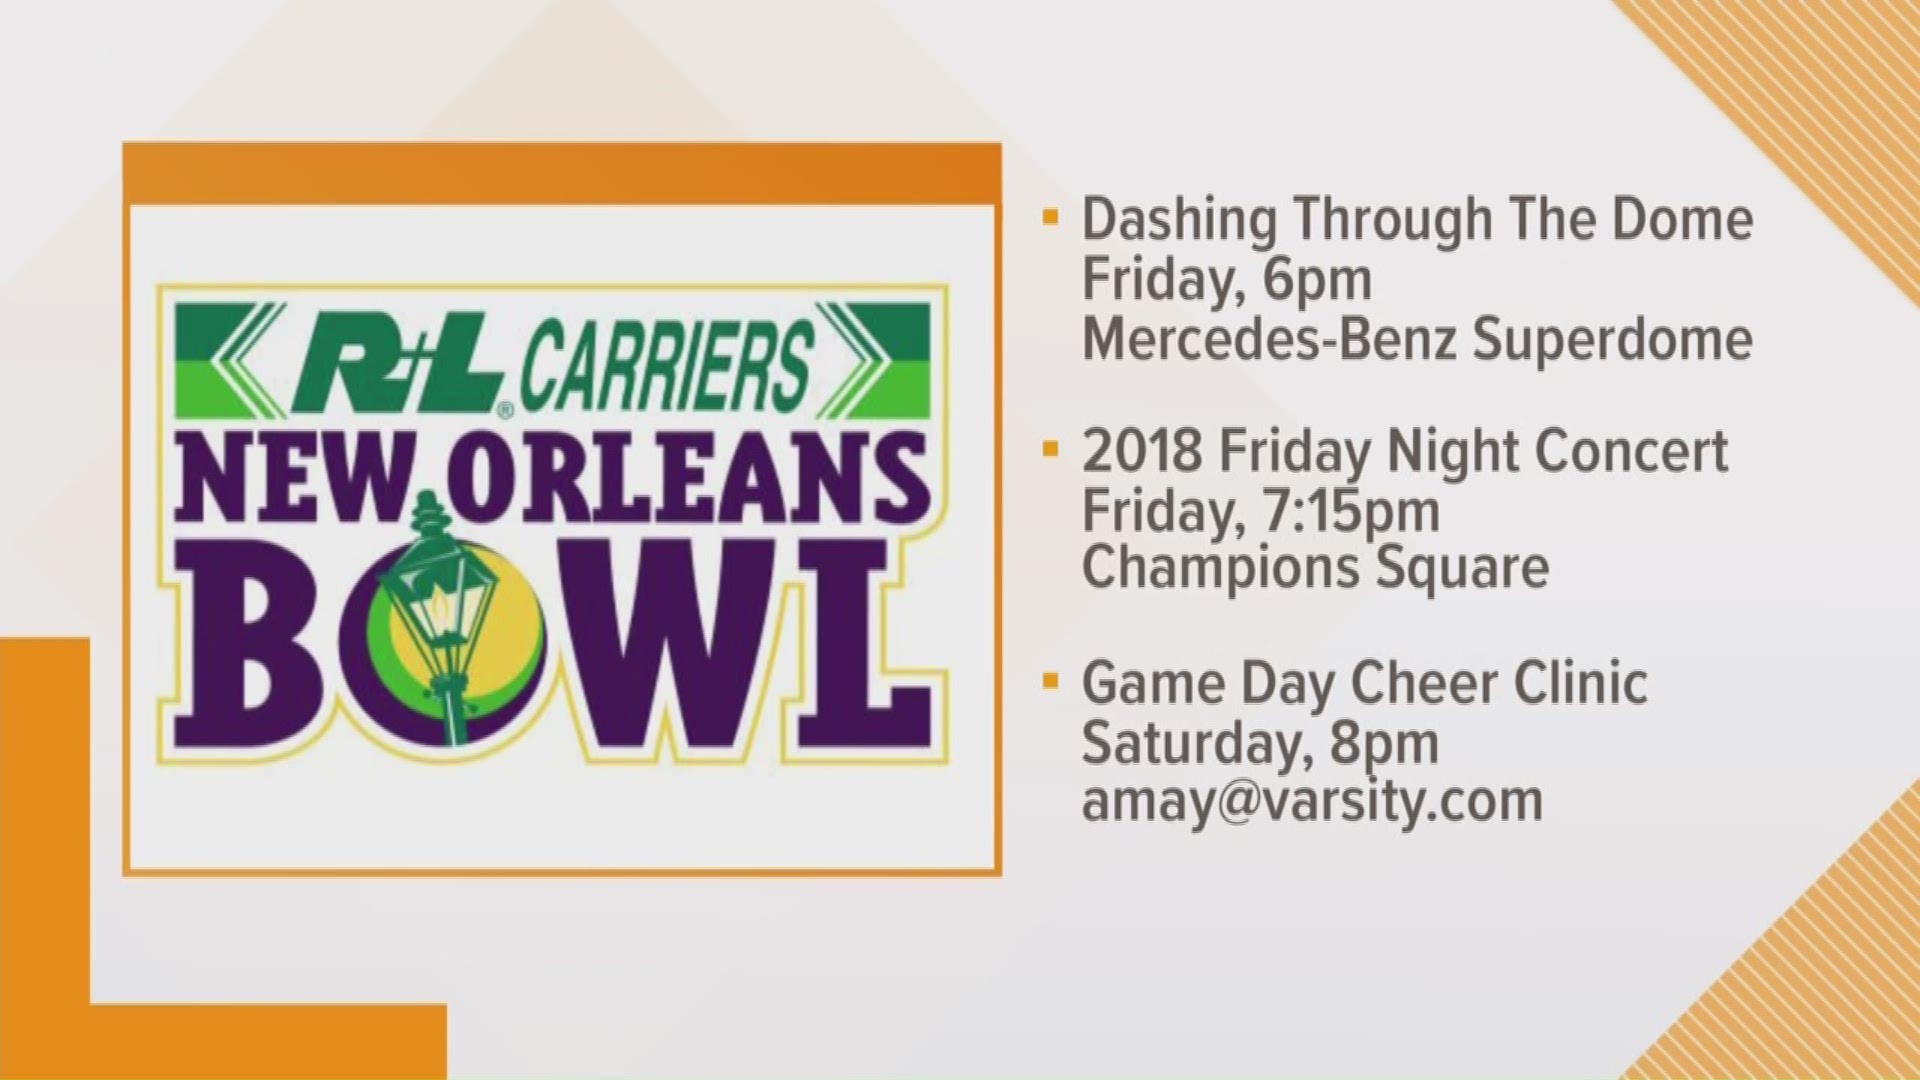 With college bowl season kicking off this weekend, Jay Cicero, president of the Greater New Orleans Sports Foundation, is here to talk about the 18th annual R L Carriers New Orleans Bowl.